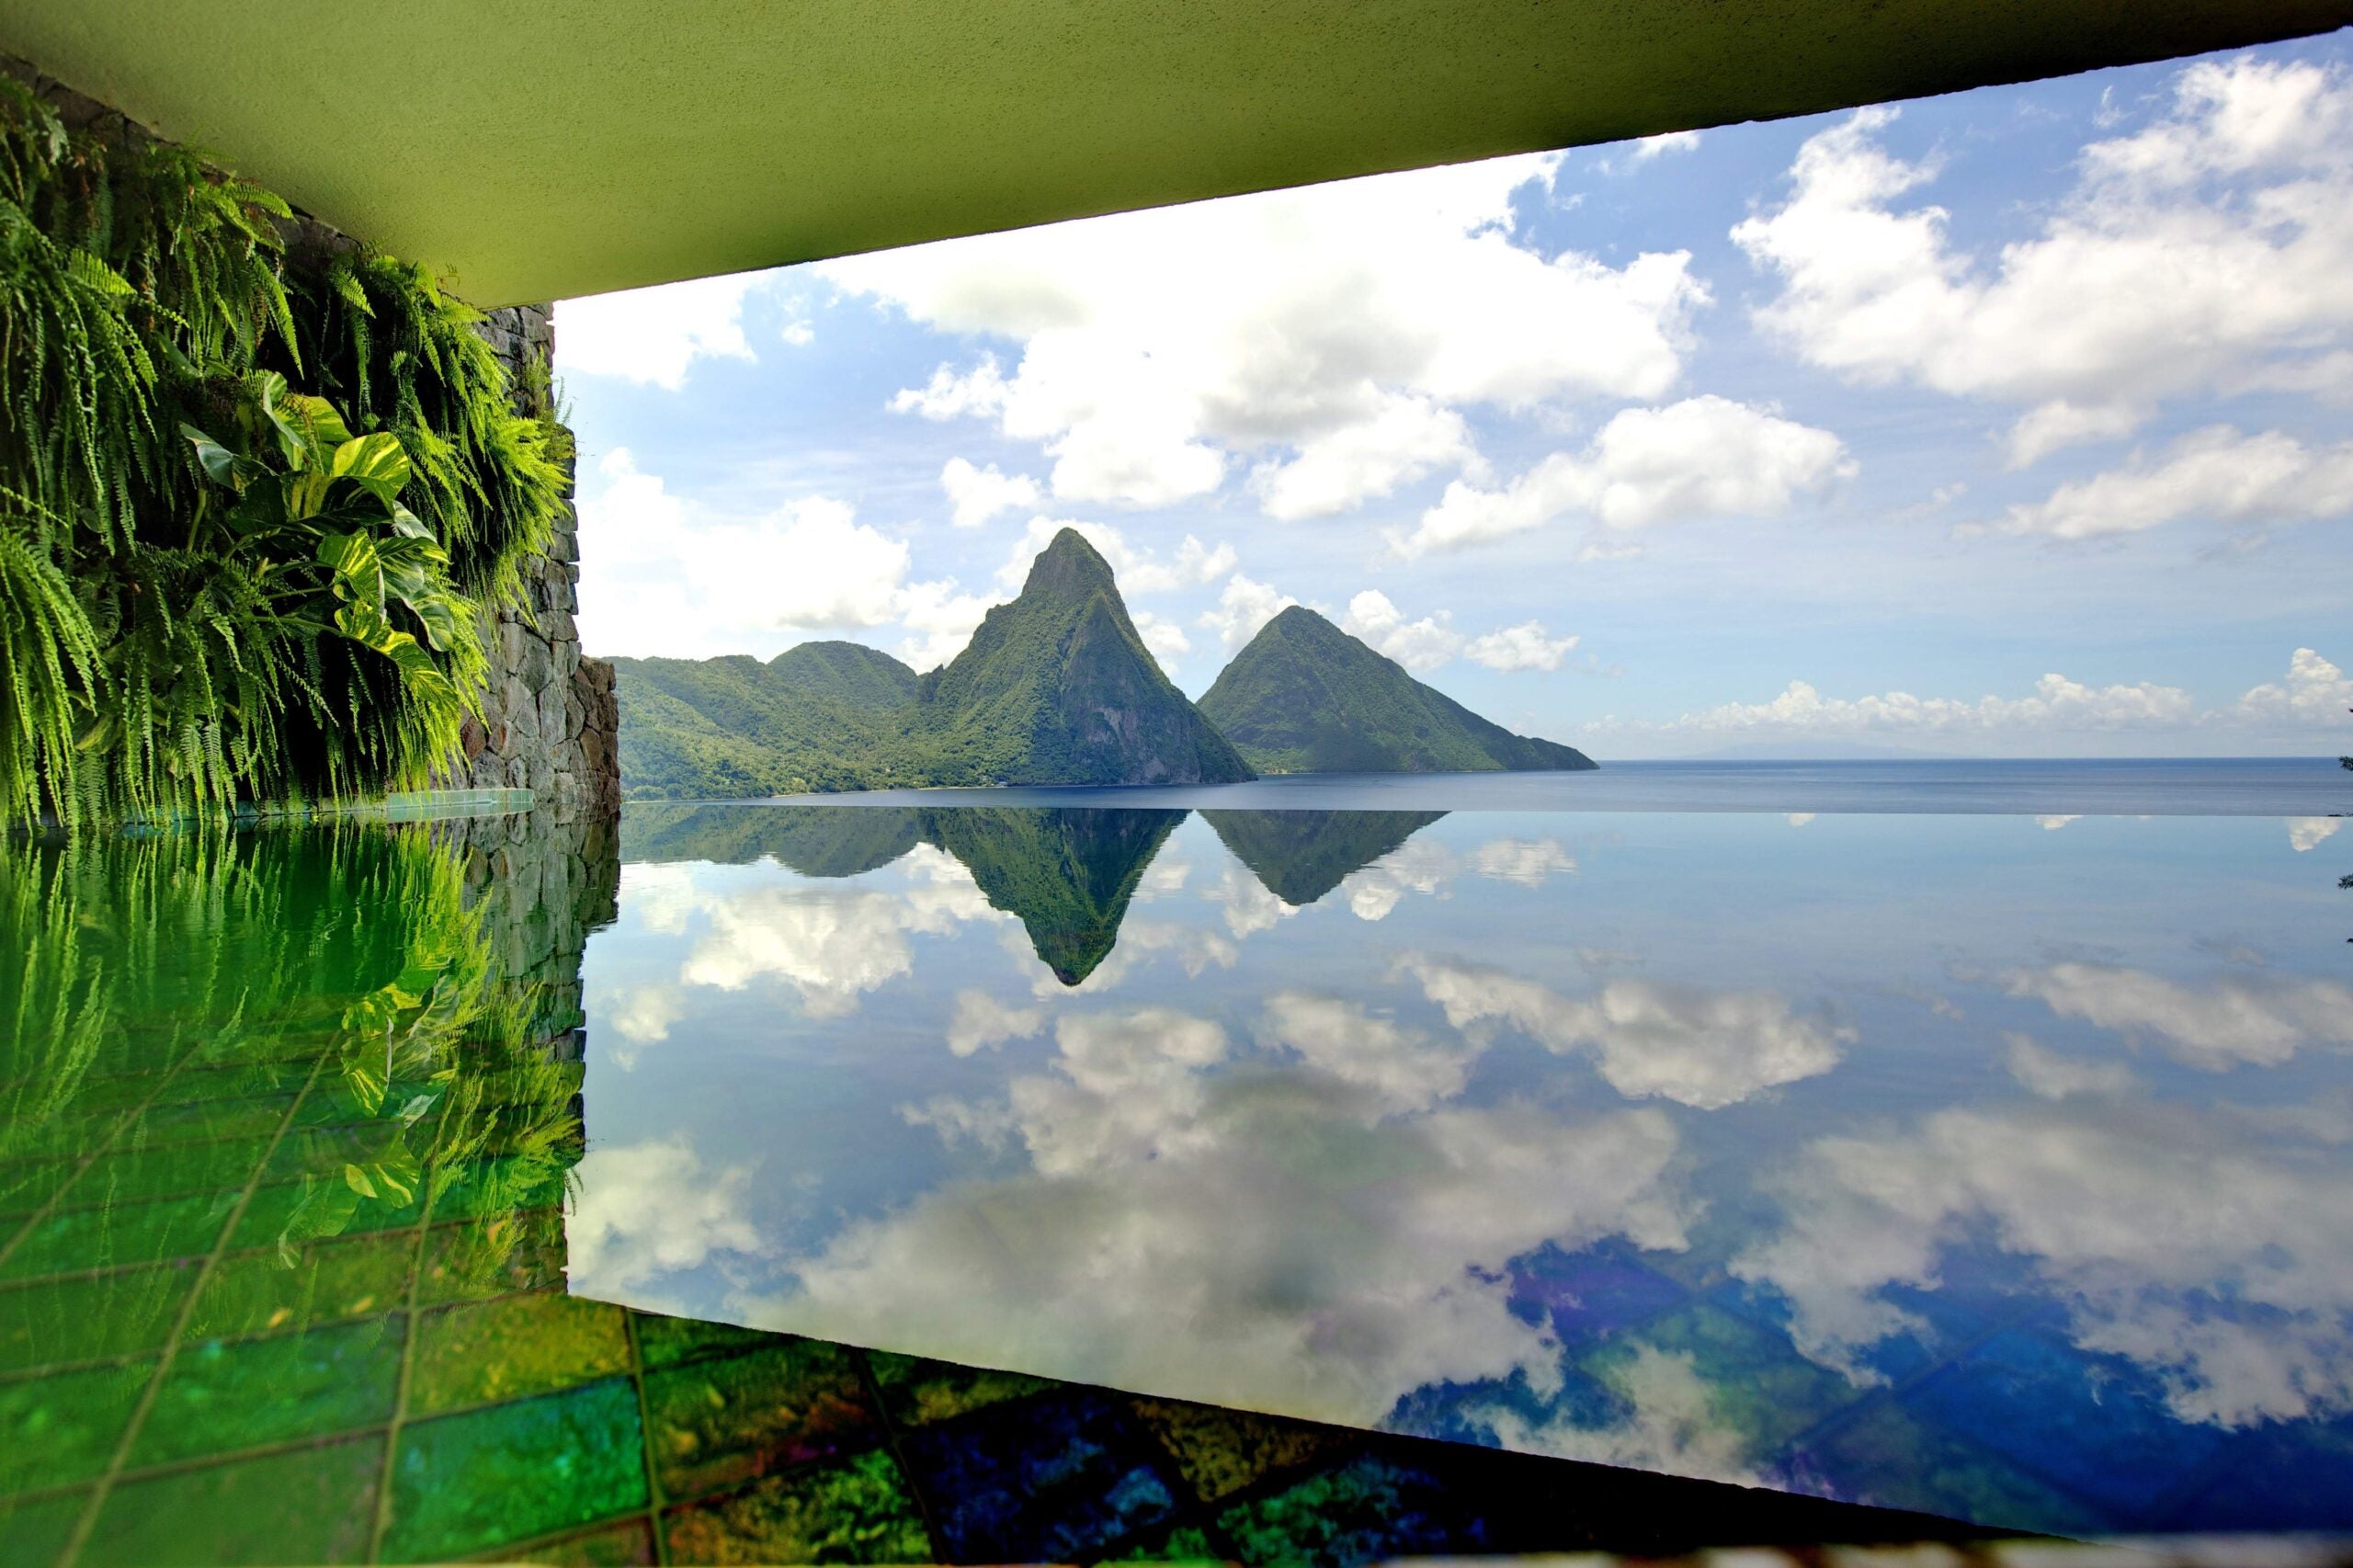 St Lucia, Jade Mountain: On honeymoon with a reluctant romantic ★★★★★